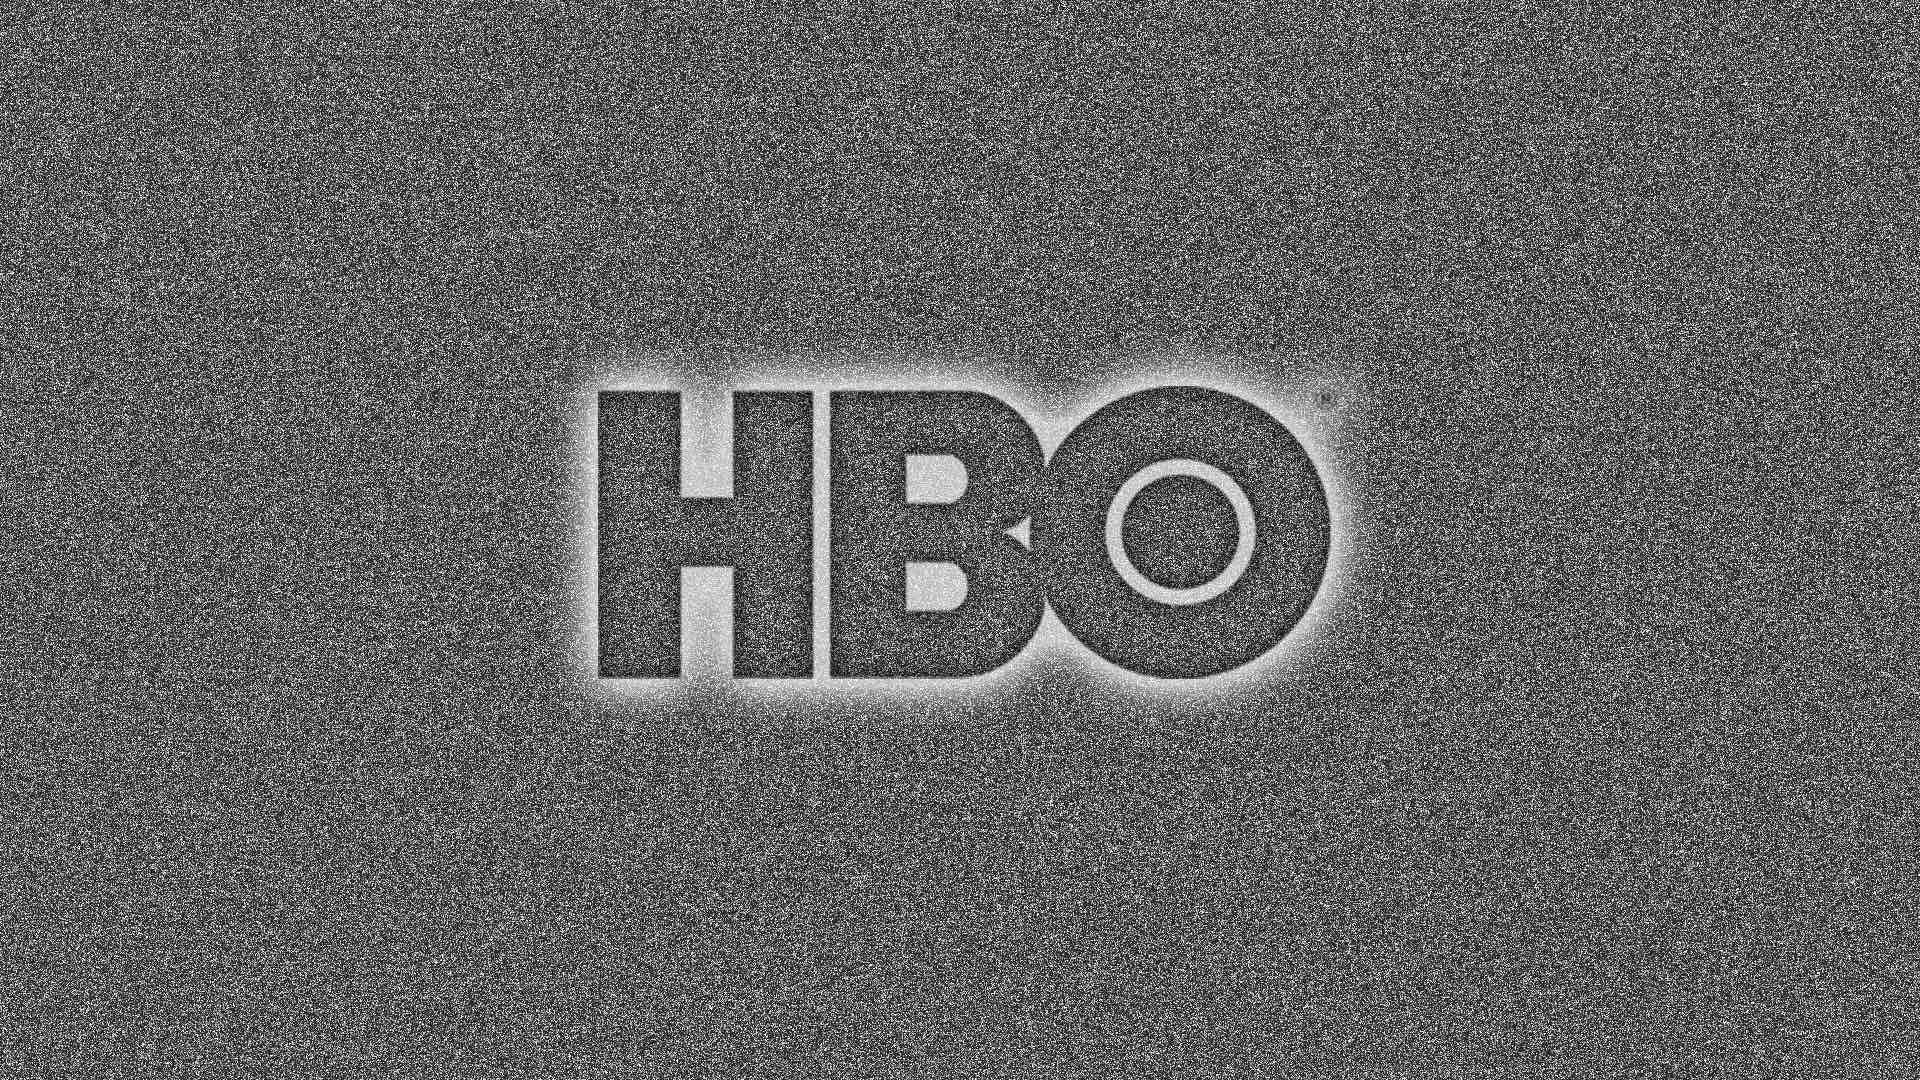 Cancel HBO Subscription